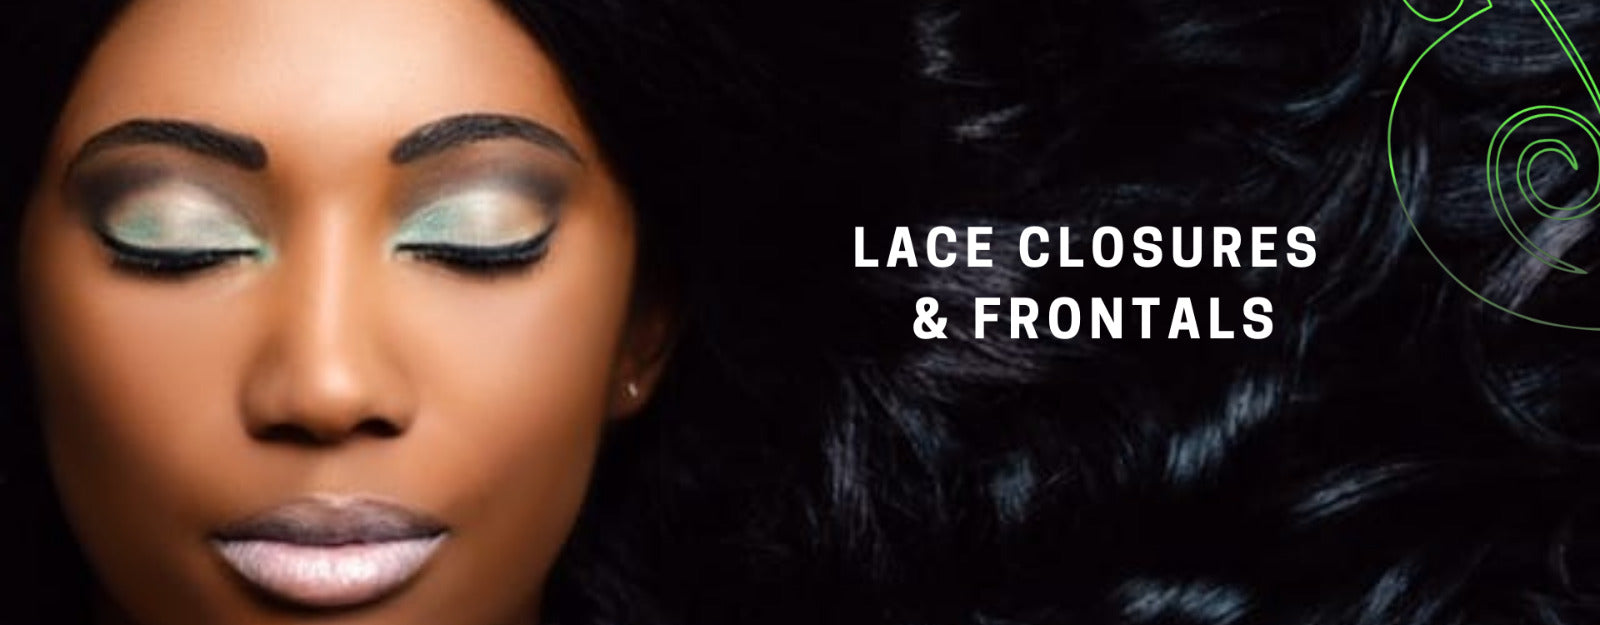 Lace Frontals & Lace Closures